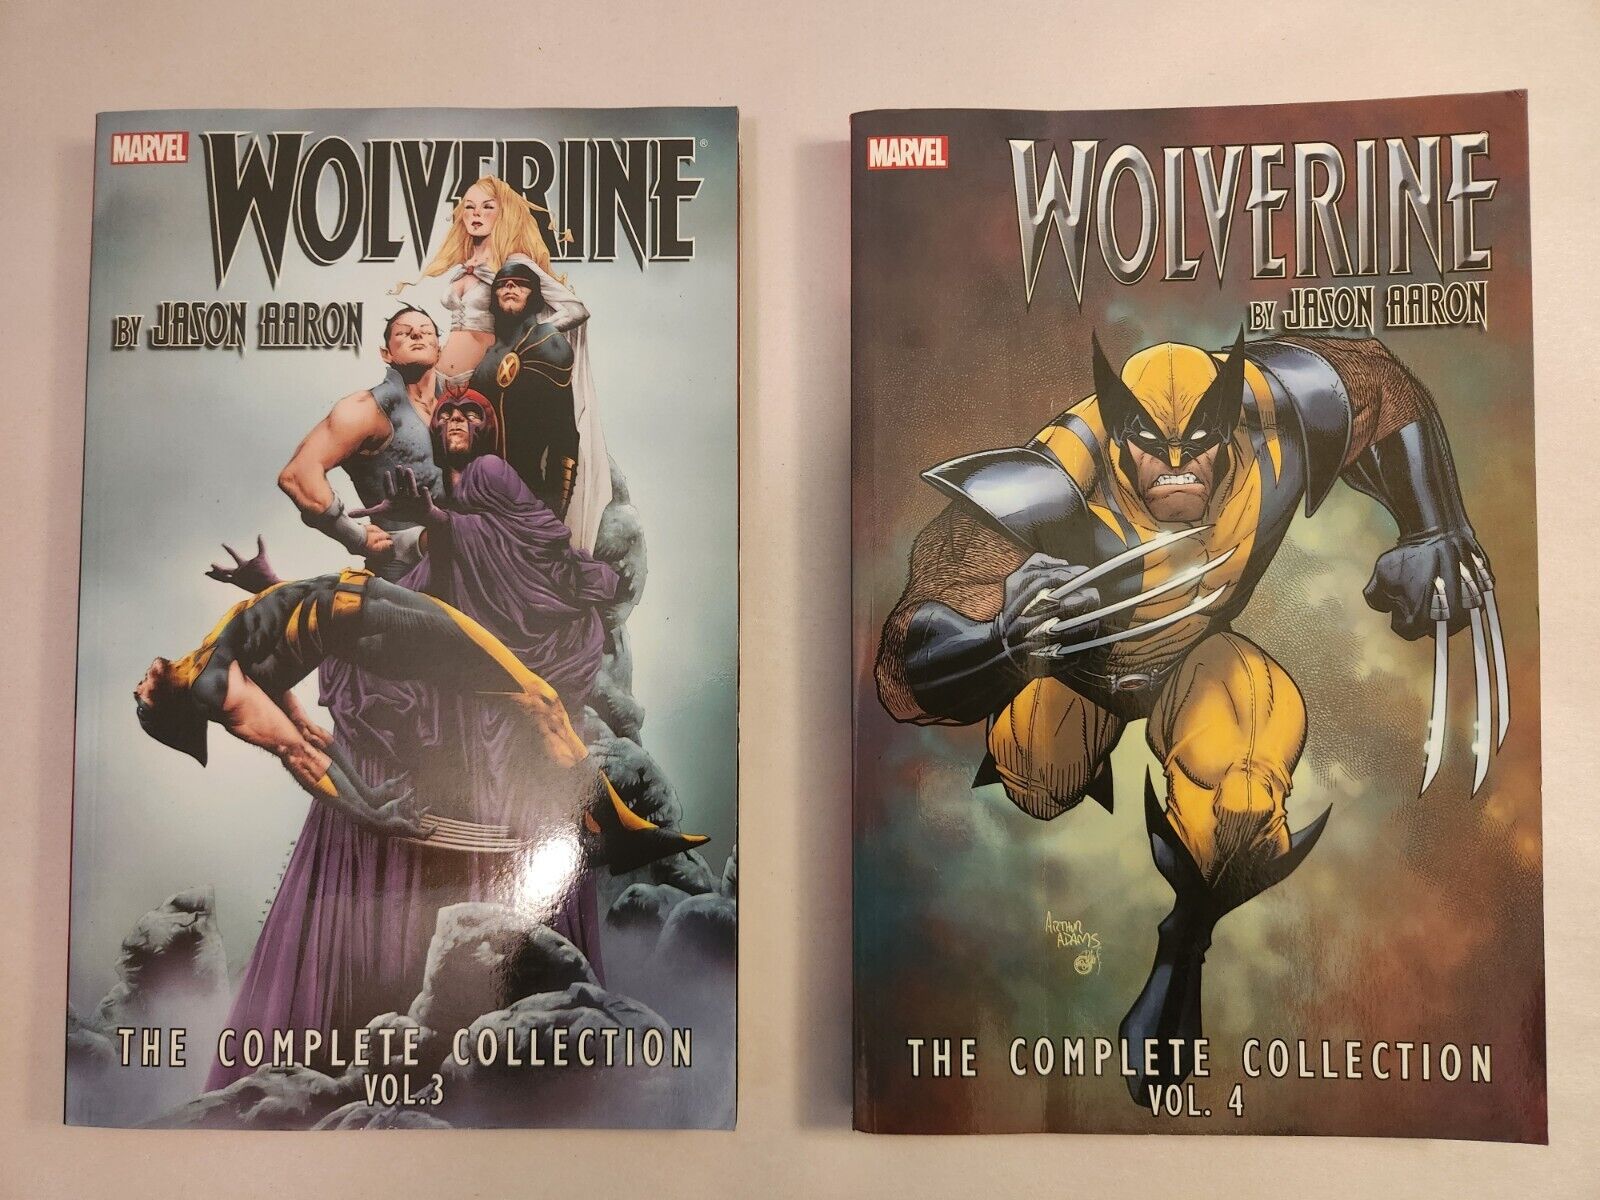 Wolverine by Jason Aaron: The Complete Collection 3 & 4 (Marvel, 2014)